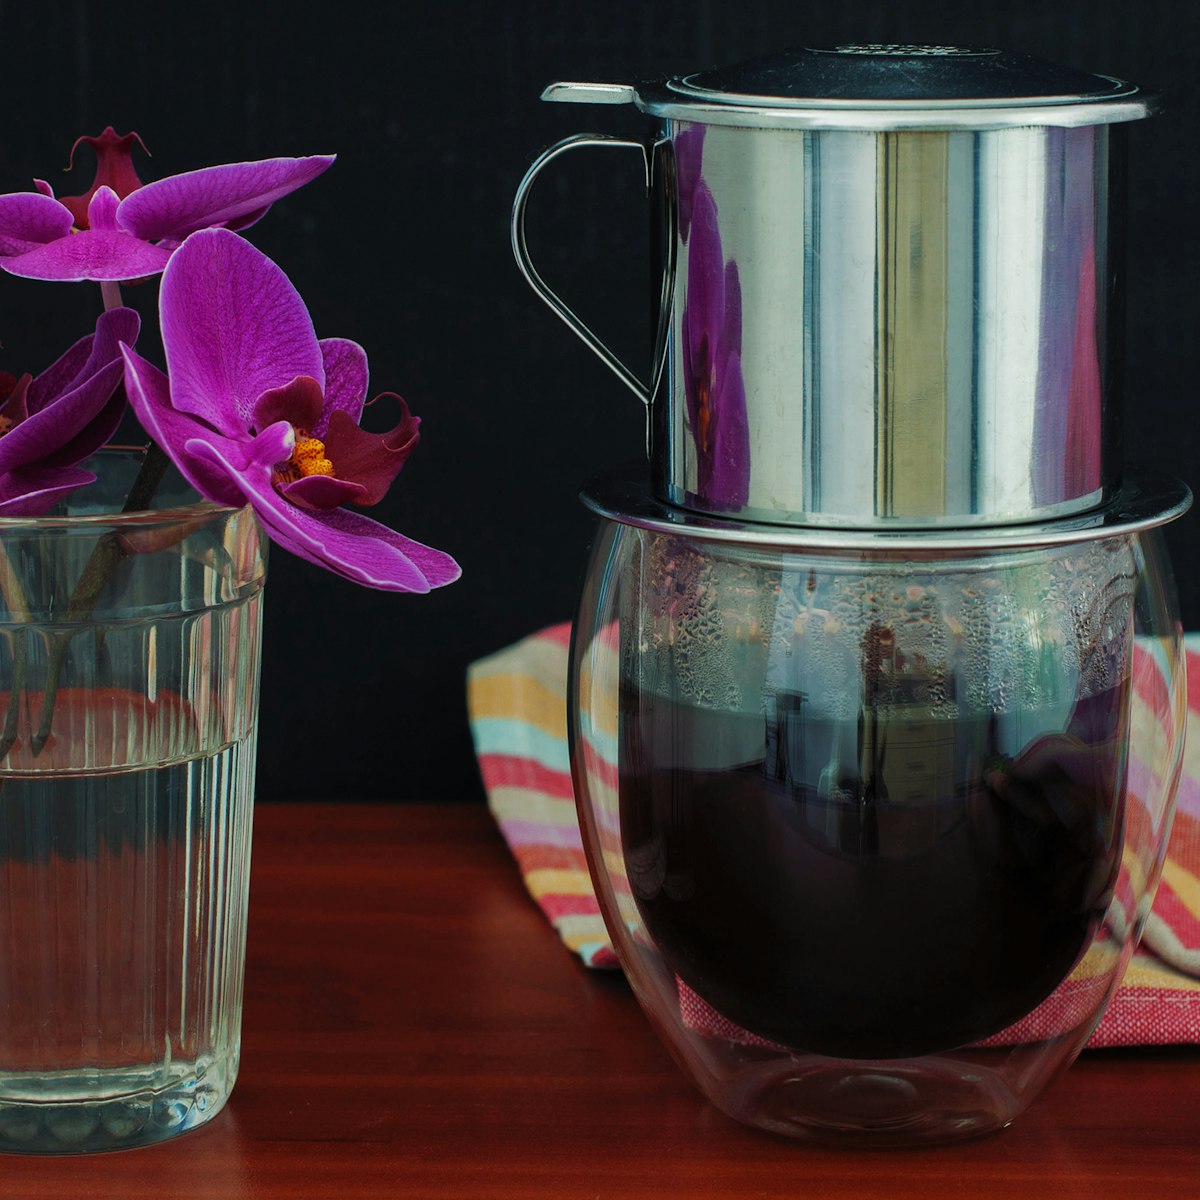 500px Photo ID: 116211643 - Vietnamese coffee and orchid on black background